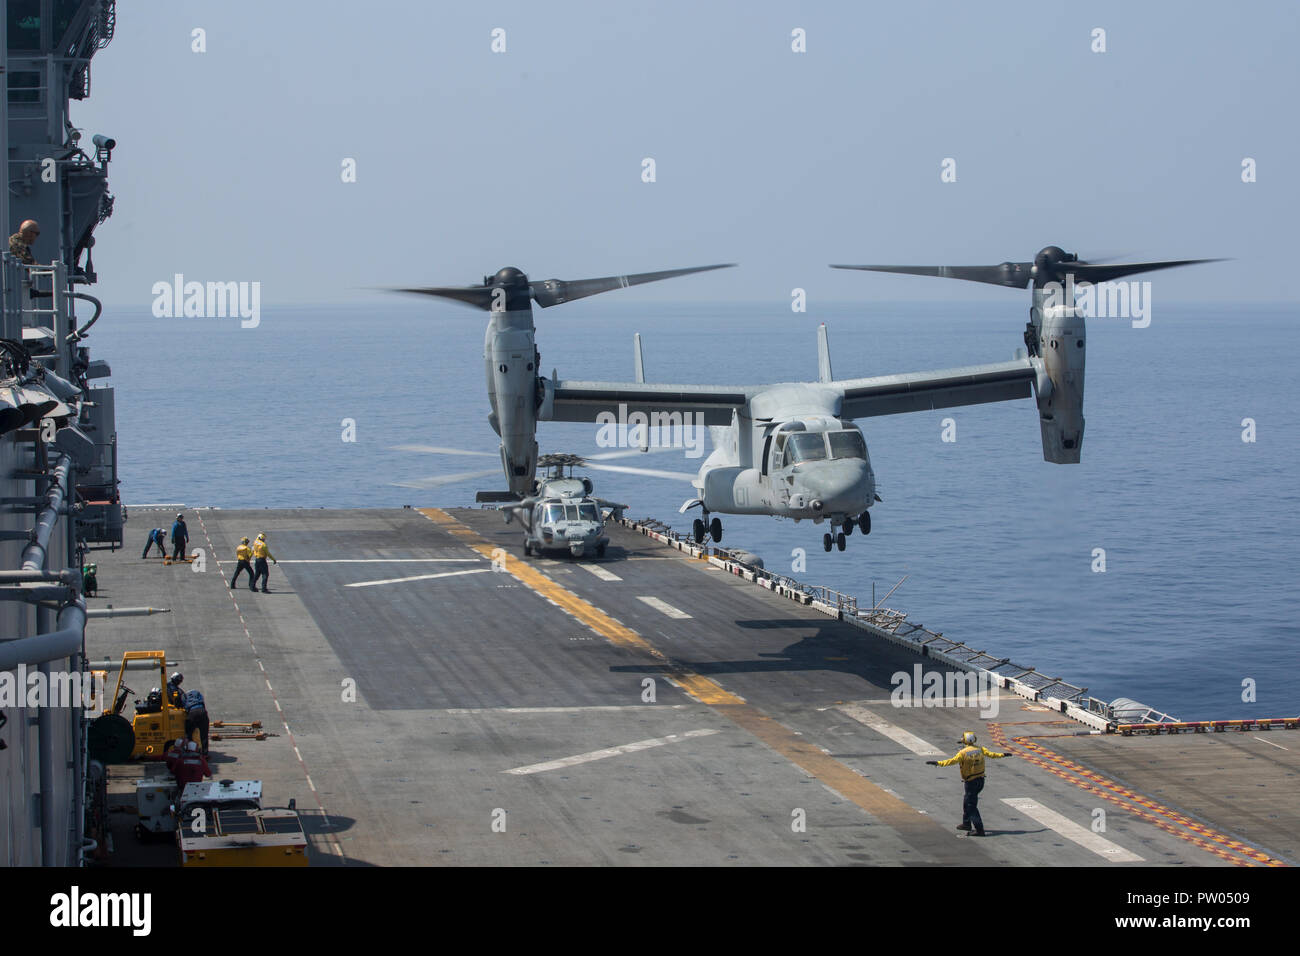 An MV-22B Osprey tiltrotor aircraft, belonging to Marine Medium Tiltrotor Squadron 262 (Reinforced), lands on the flight deck of the amphibious assault ship USS Wasp (LHD 1), underway in the South China Sea, Oct. 11, 2018. Combat cargo Marines with the 31st Marine Expeditionary Unit off loaded the MV-22B’s, which brought back Marines and gear from exercise KAMANDAG 2. KAMANDAG 2 is a multinational exercise, including; the Republic of the Philippines, Japan, and the United States. The 31st MEU, the Marine Corps’ only continuously forward-deployed MEU, provides a flexible force ready to perform  Stock Photo